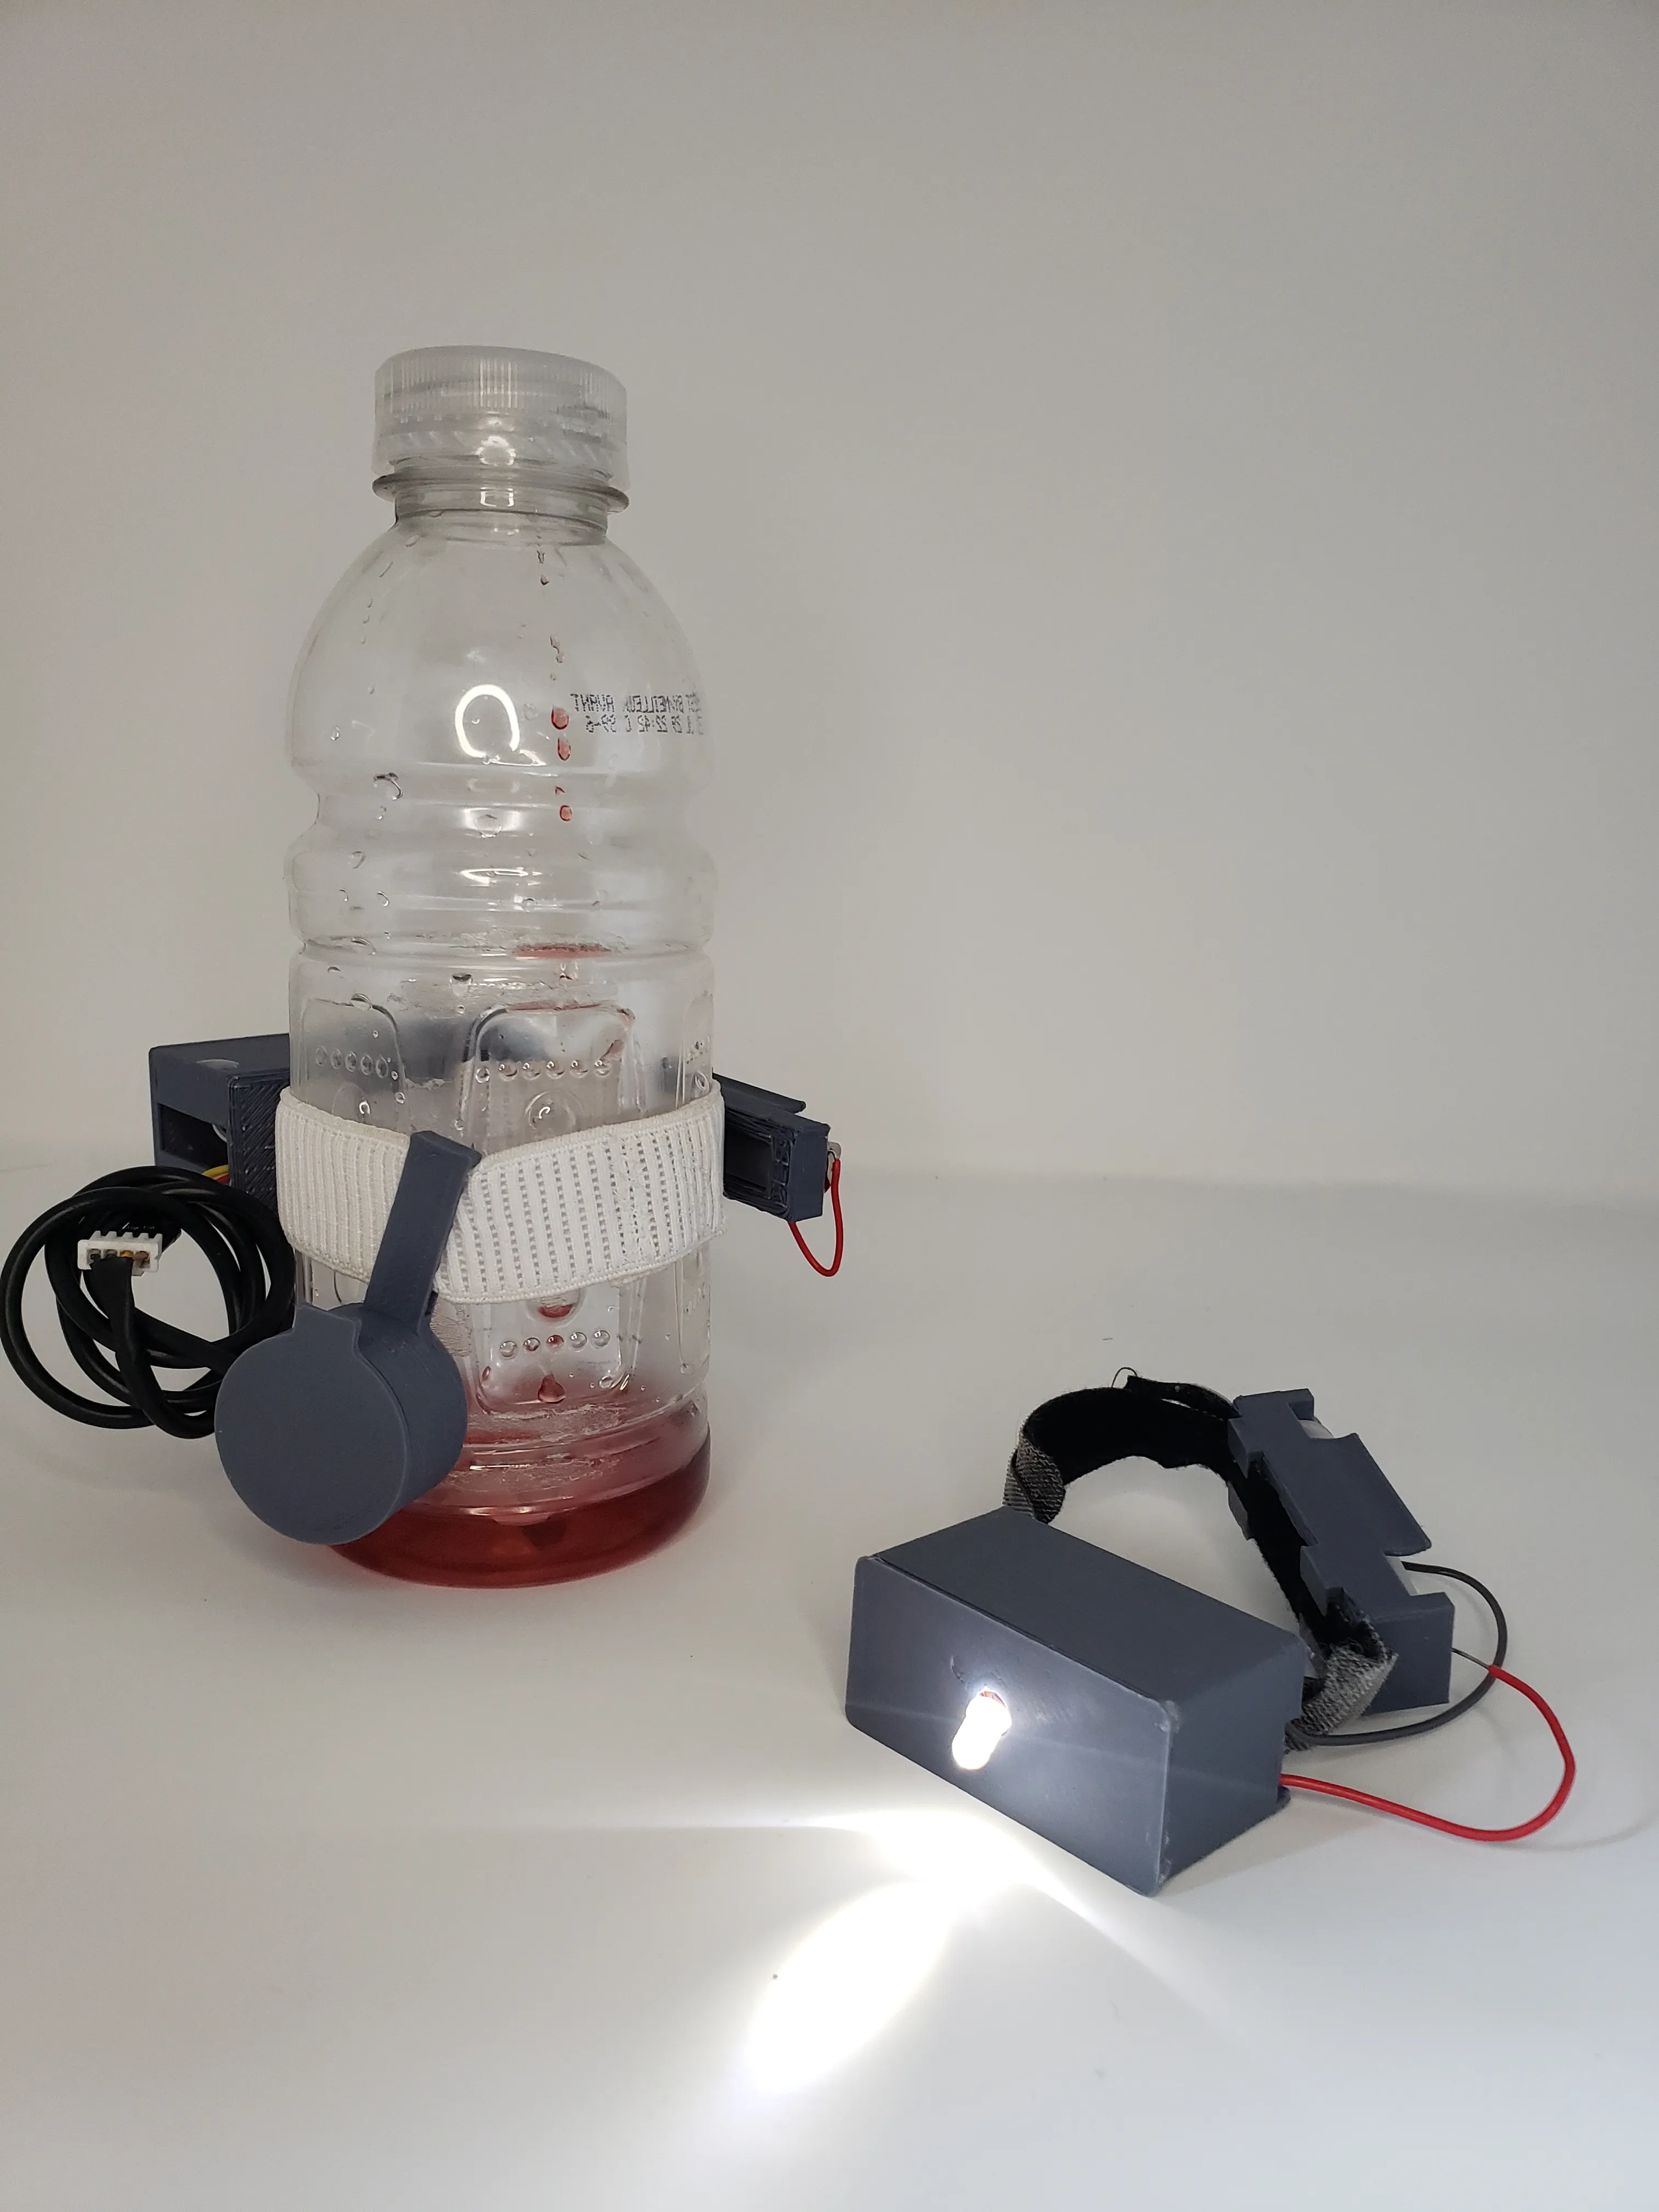 bottle filled with liquid lower than the non contact fluid sensor that is held onto the bottle with an elastic. Beside the bottle is a wrist band with an led on. 